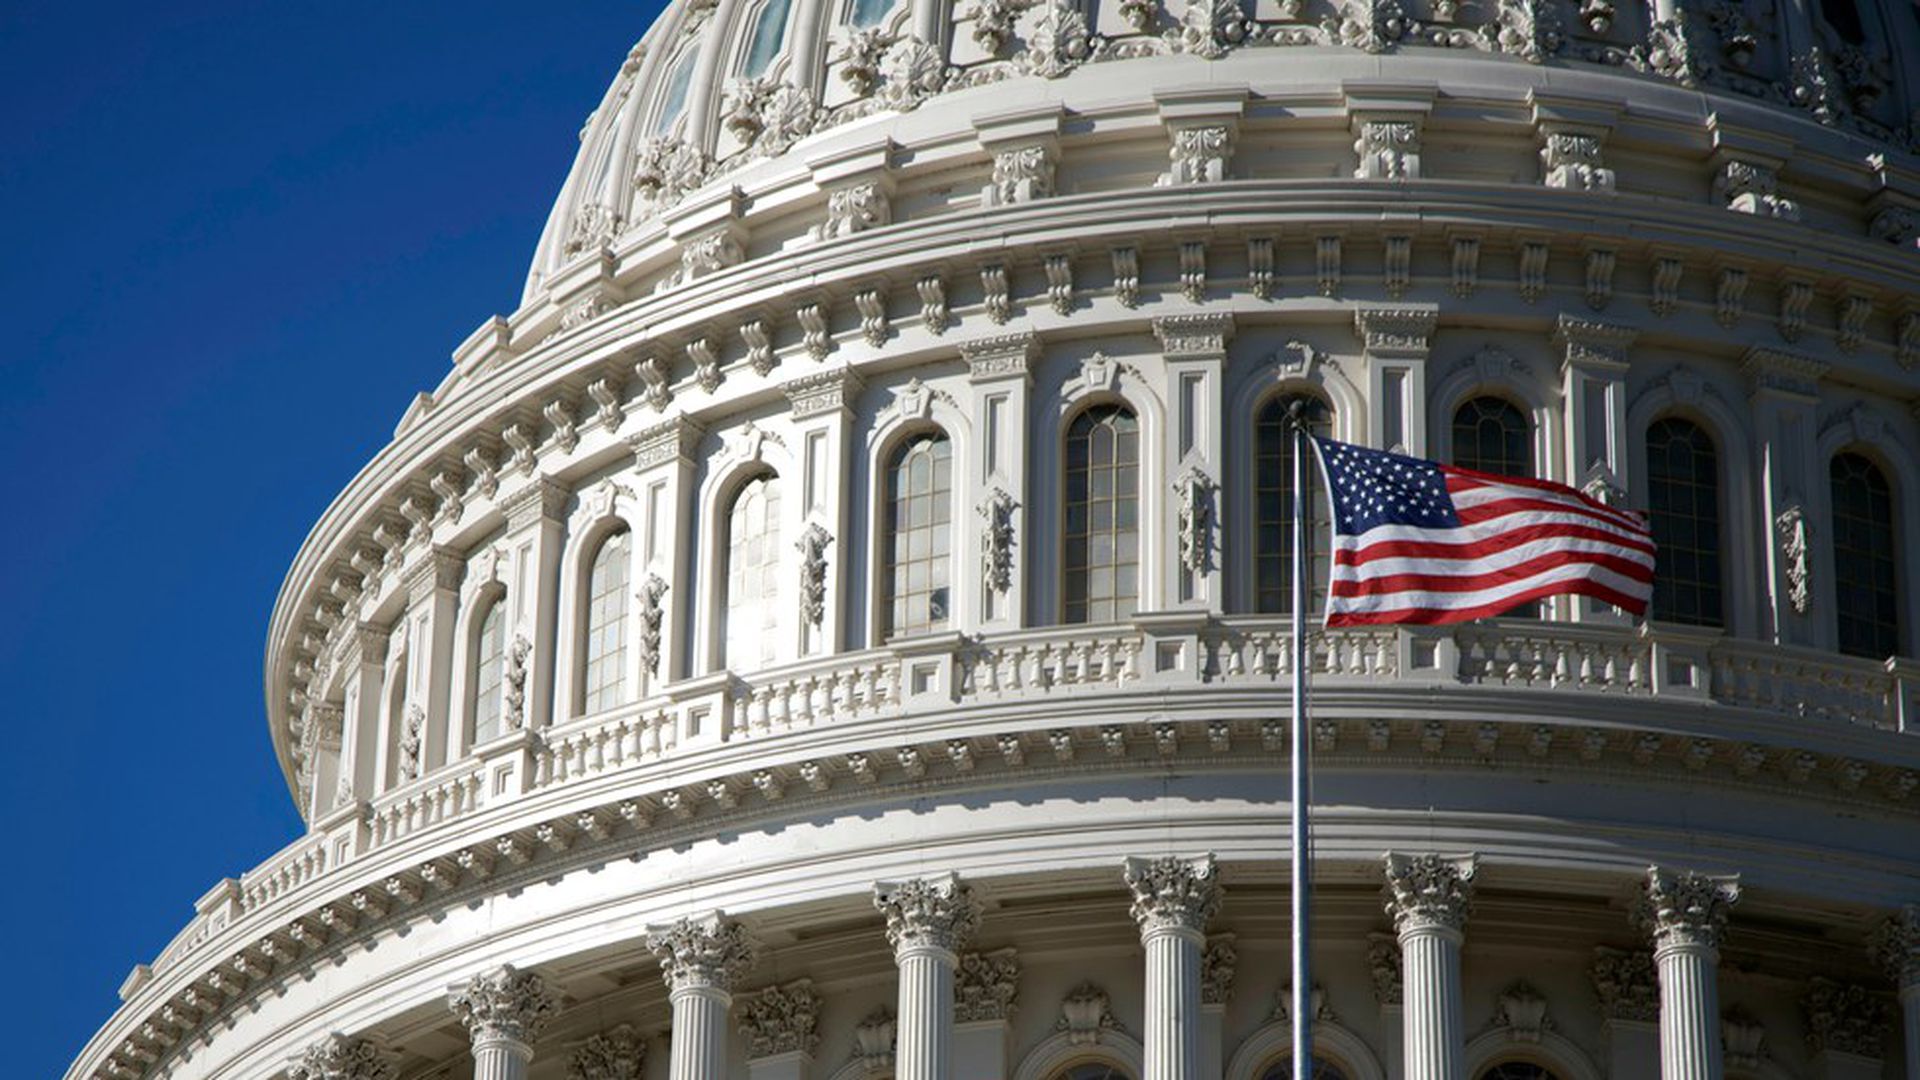 Senate Appropriations Committee recommends $2 million in aid to Artsakh - The US Armenians